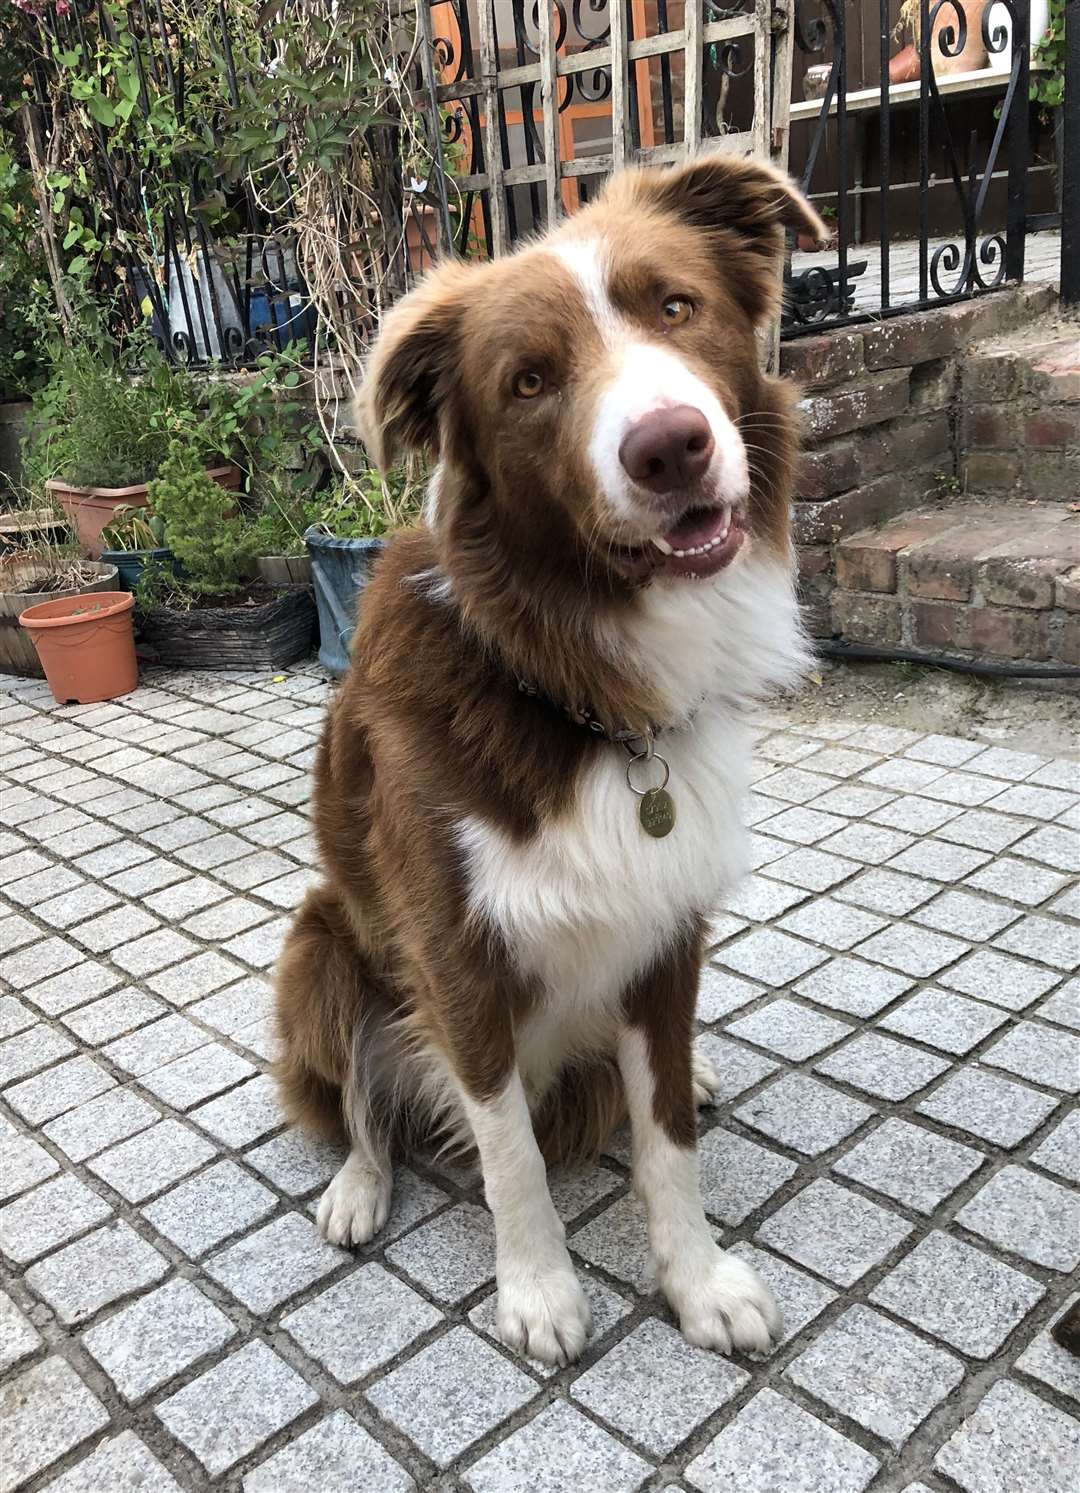 Taffy is a five-year-old Welsh Collie